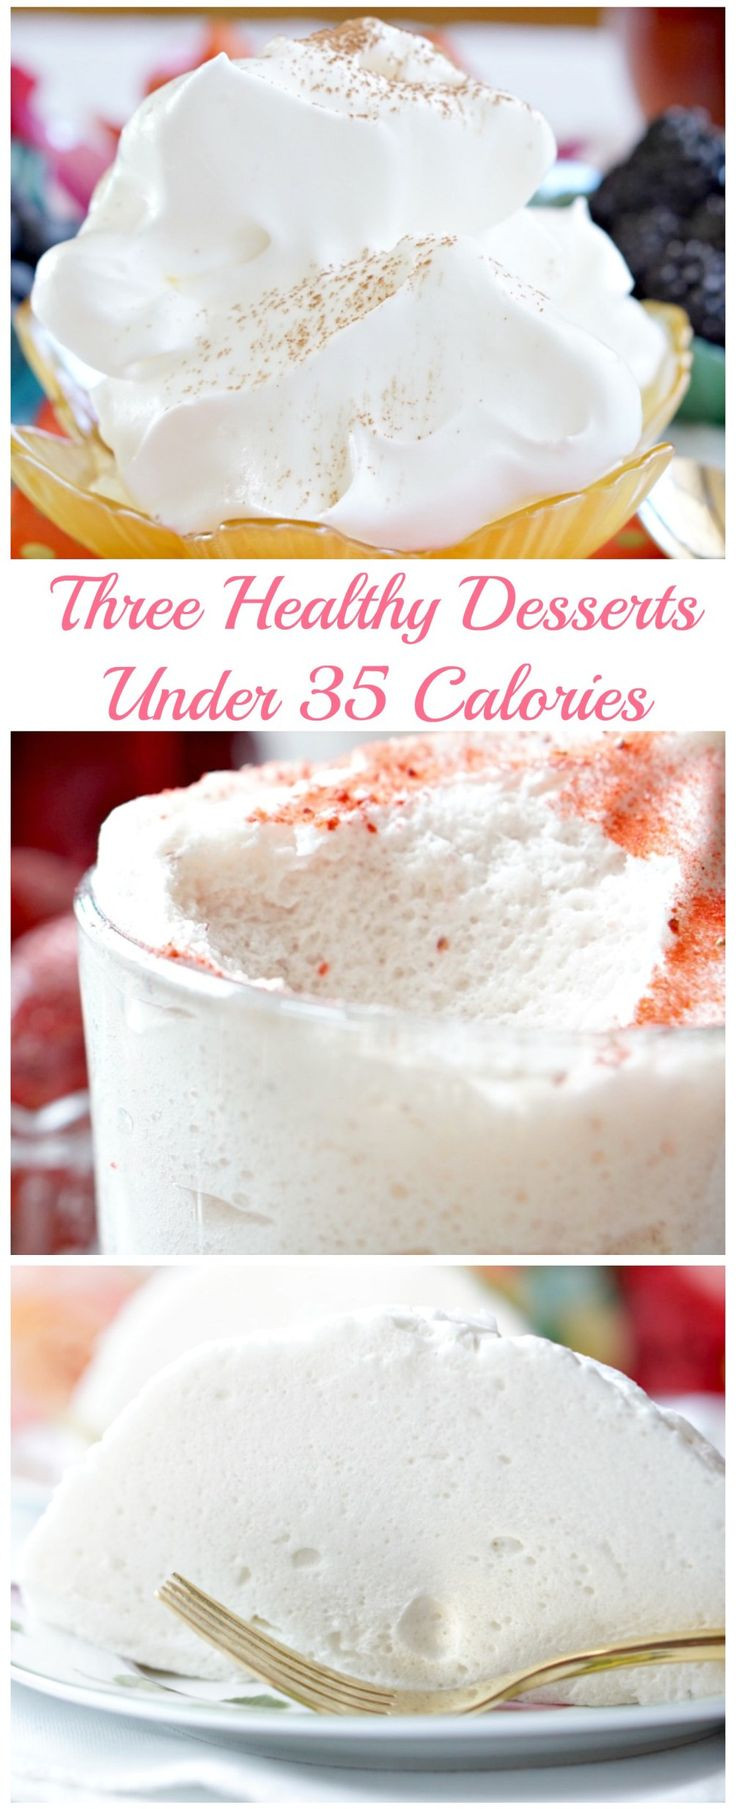 Low Calories Desserts
 Avoid Holiday Weight Gain